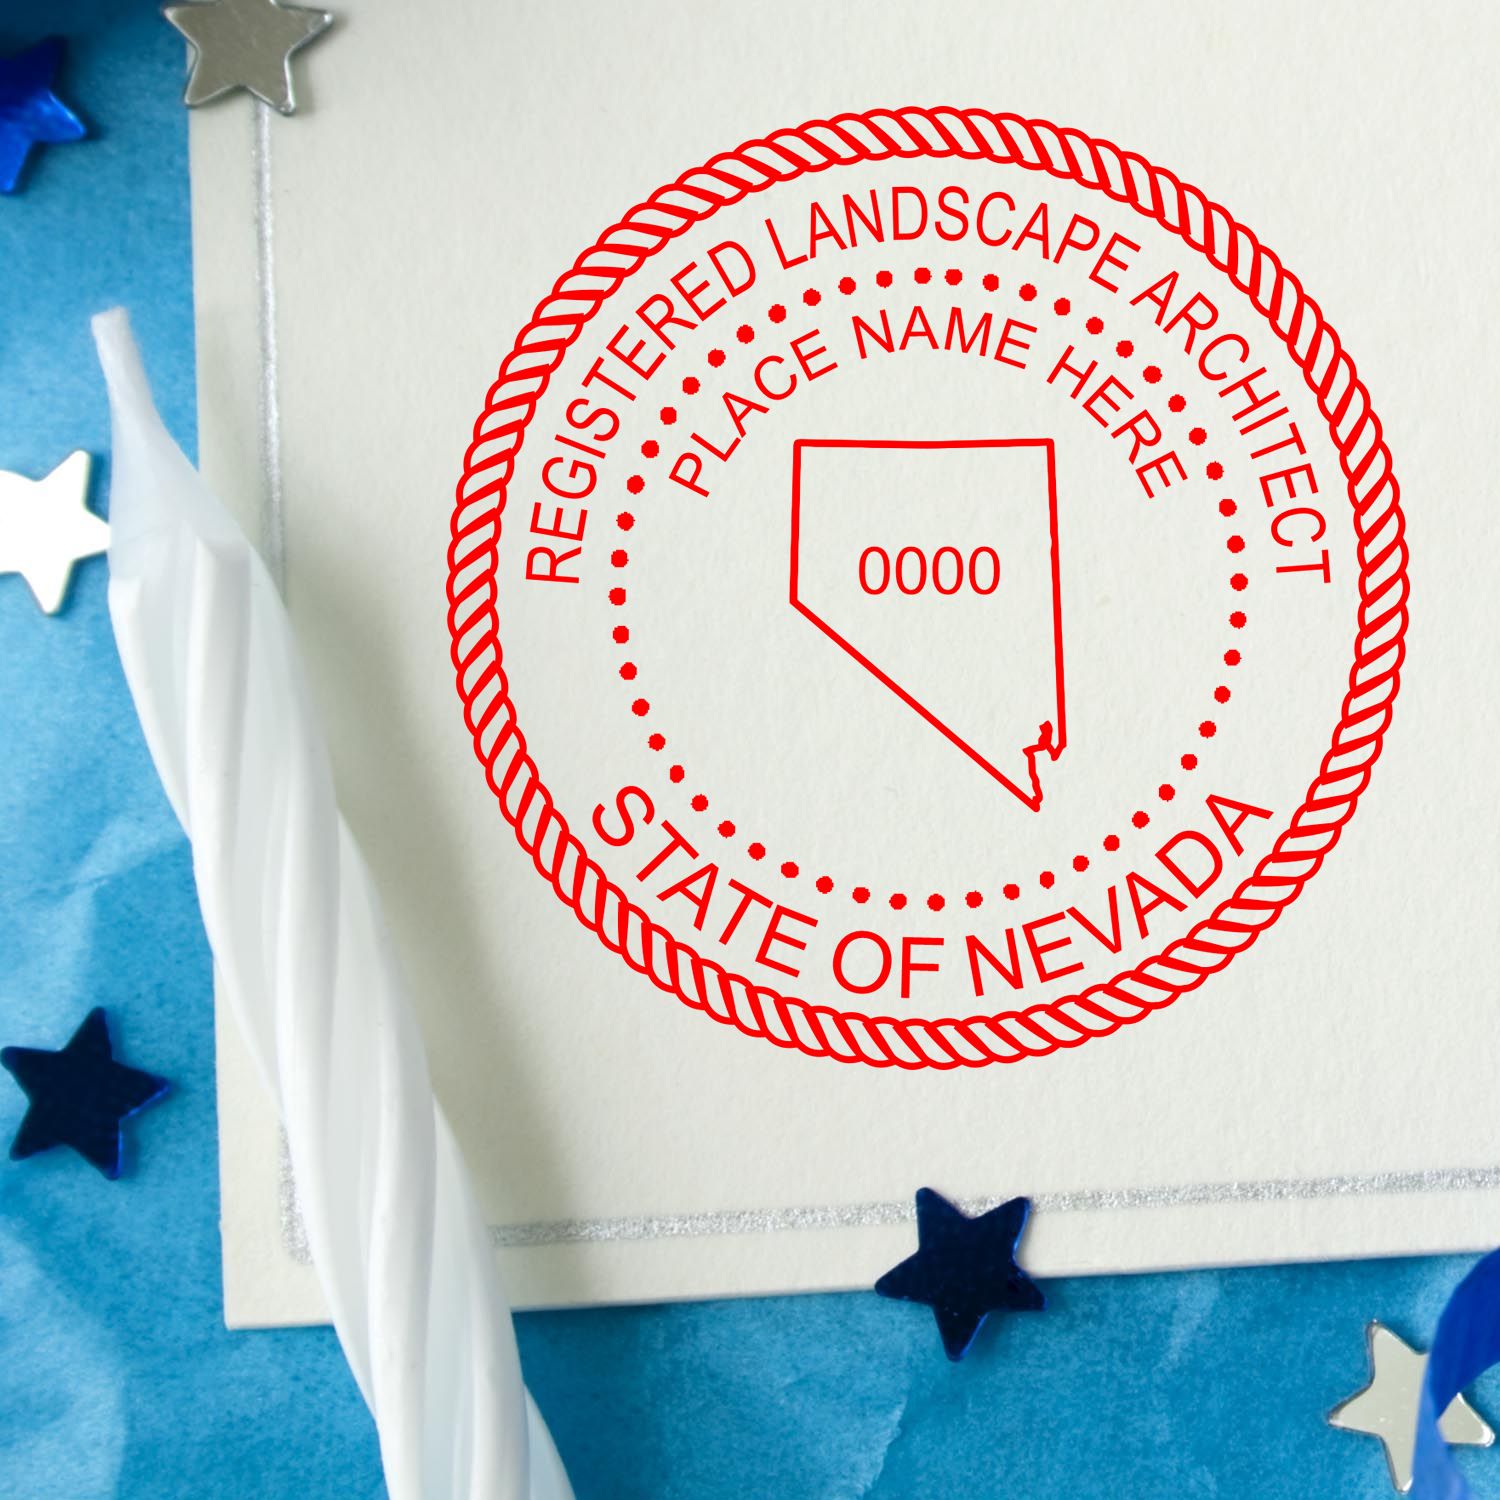 A photograph of the Digital Nevada Landscape Architect Stamp stamp impression reveals a vivid, professional image of the on paper.